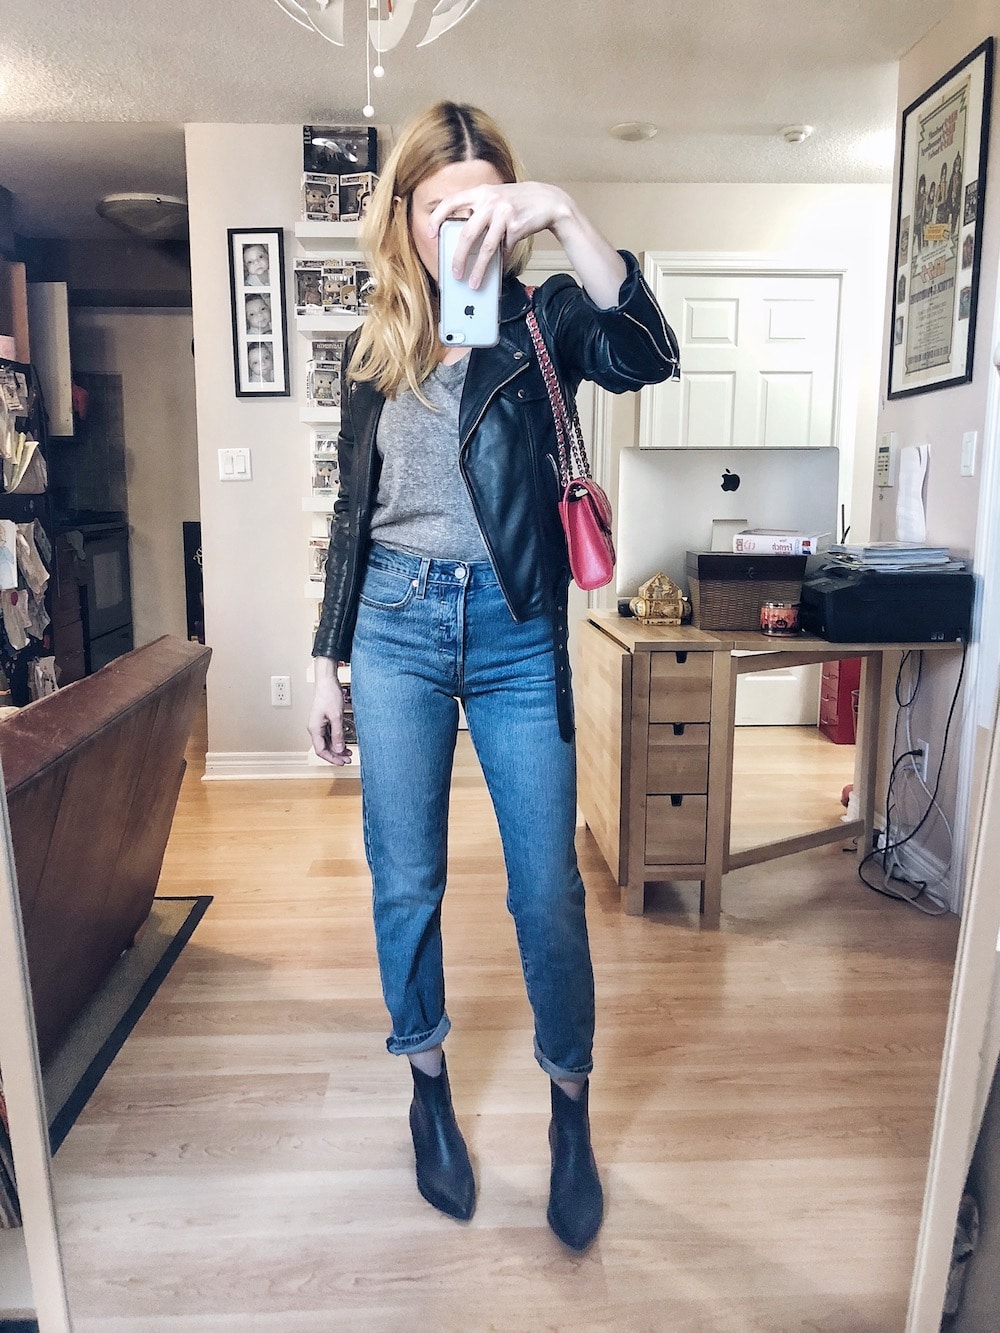 What I wore this week. I am wearing the Madewell ex-boyfriend tee, Levi's Wedgie Icons, a black leather jacket, black booties, and a red Rebecca Minkoff purse. #livelovesara